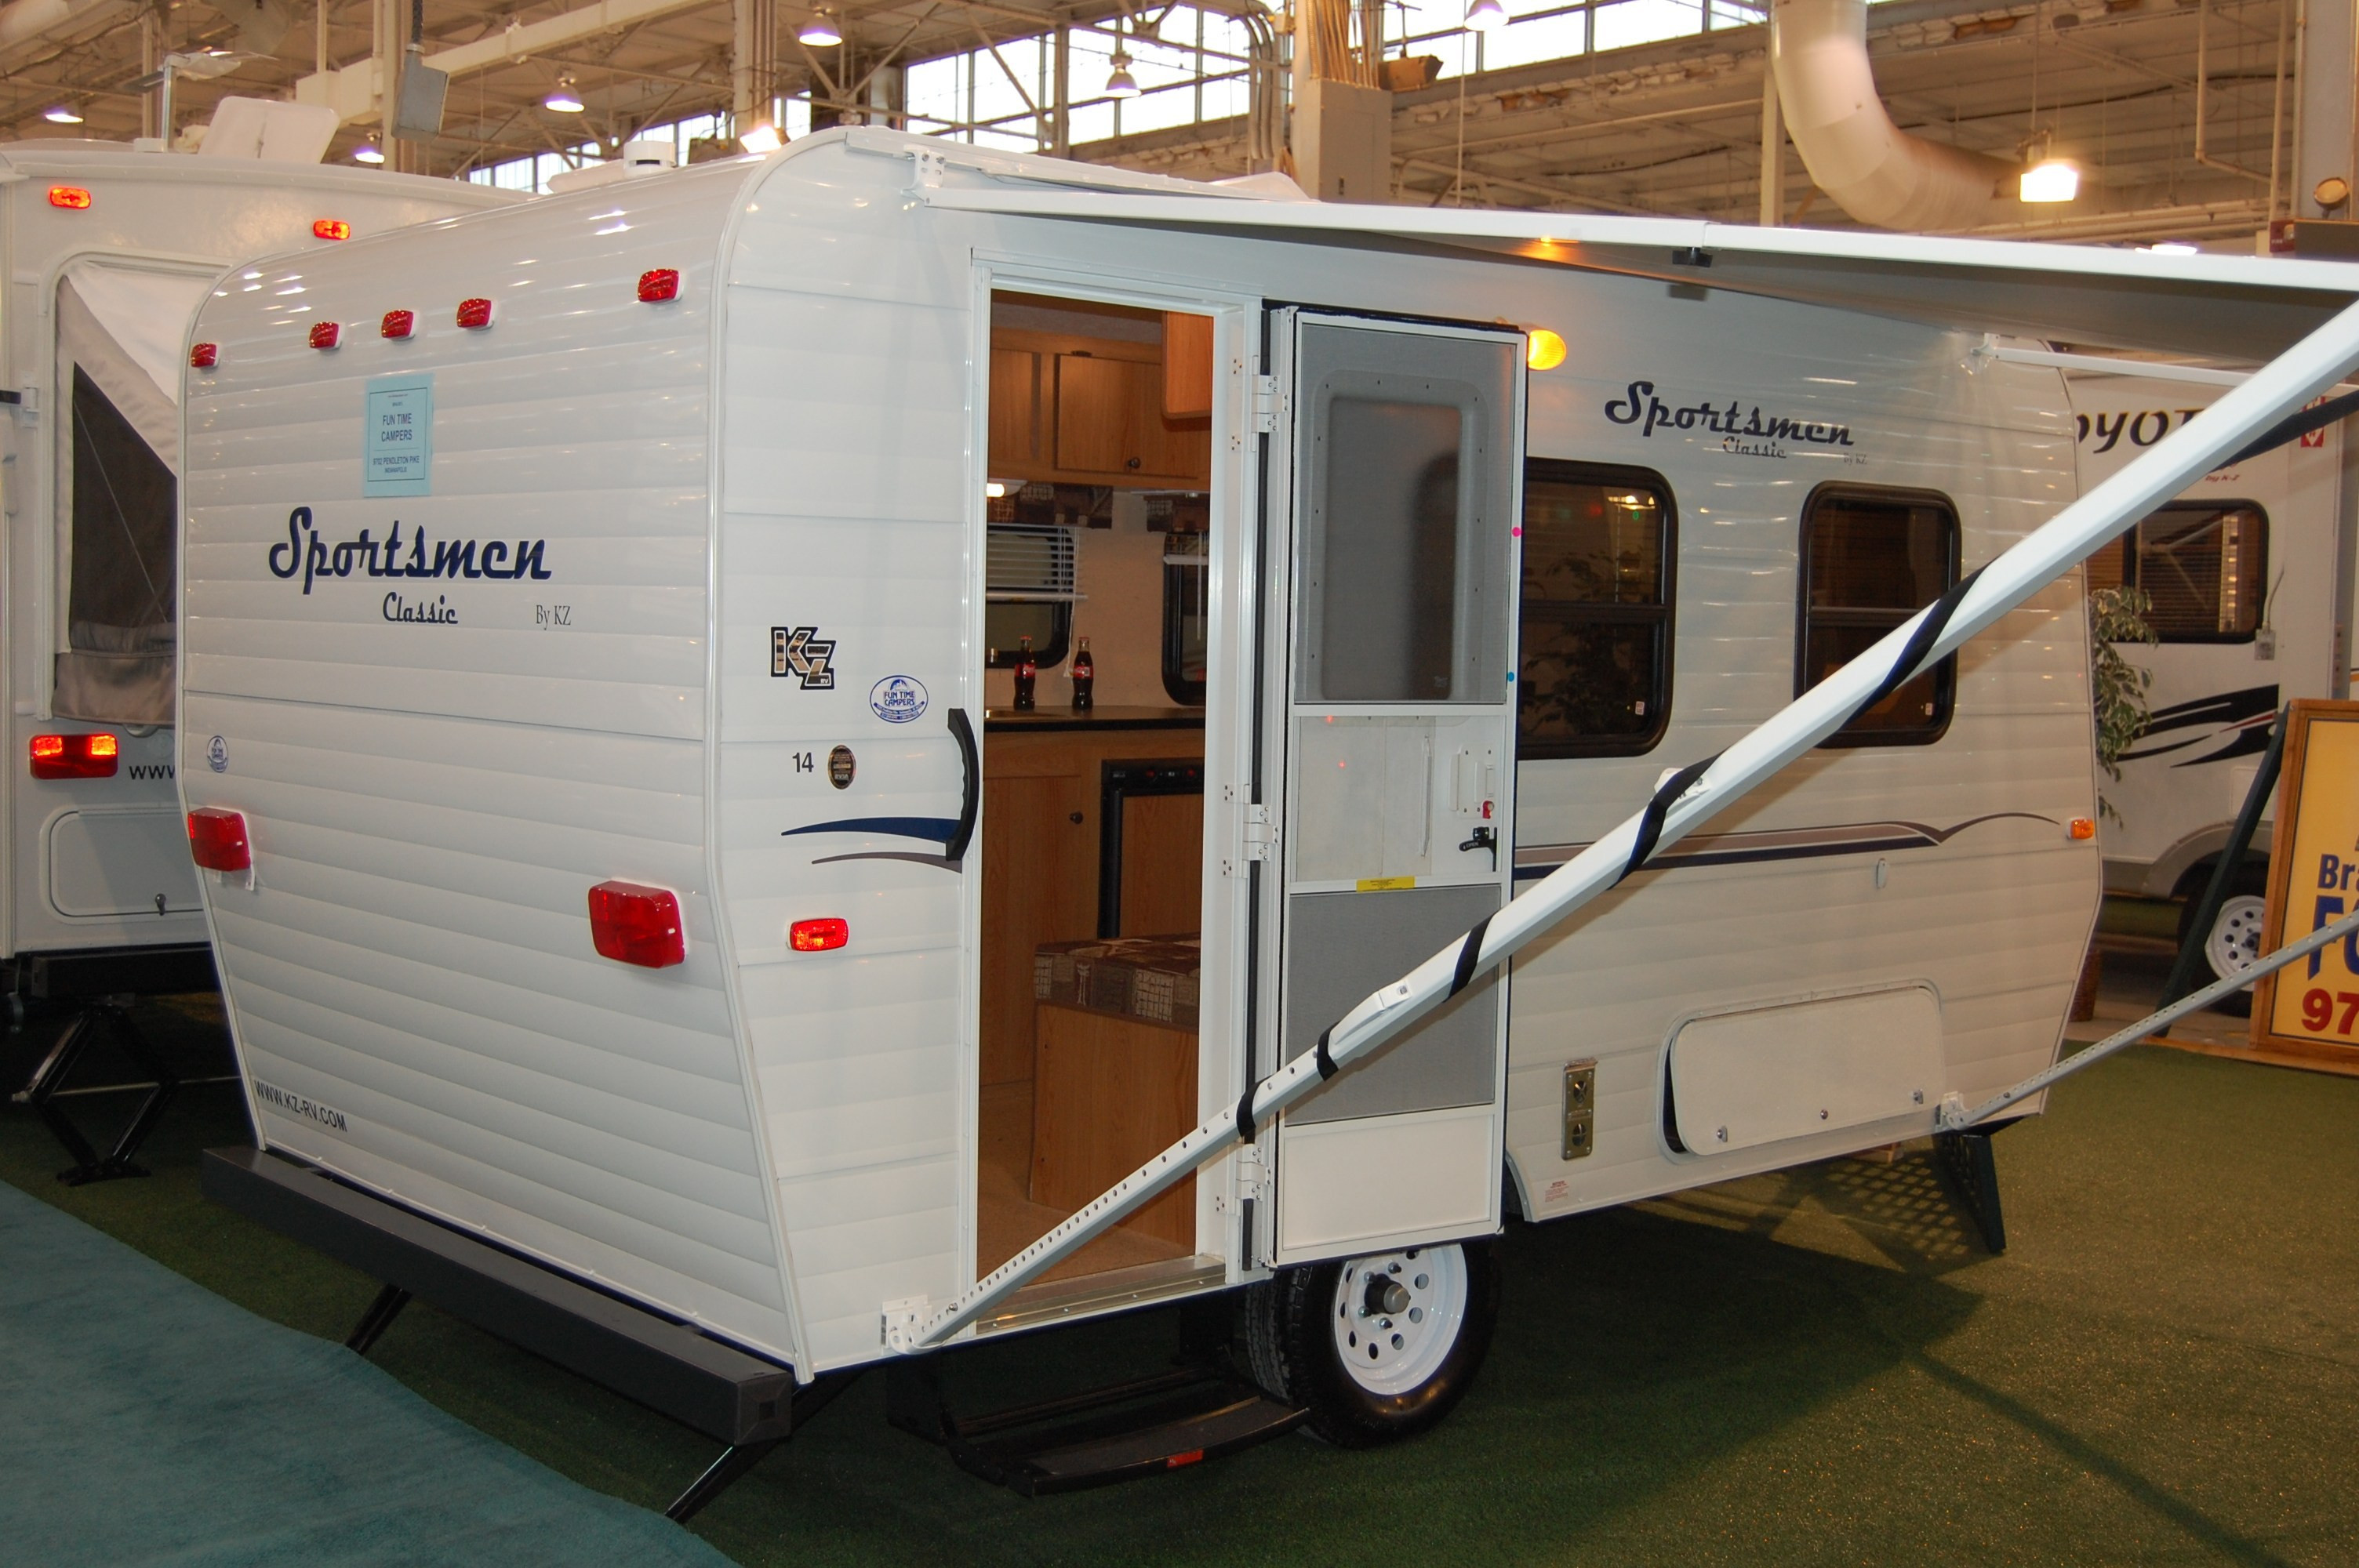 Best ideas about Small Travel Trailers With Bathroom . Save or Pin 97 Extraordinary Teardrop Trailer With Bathroom Now.